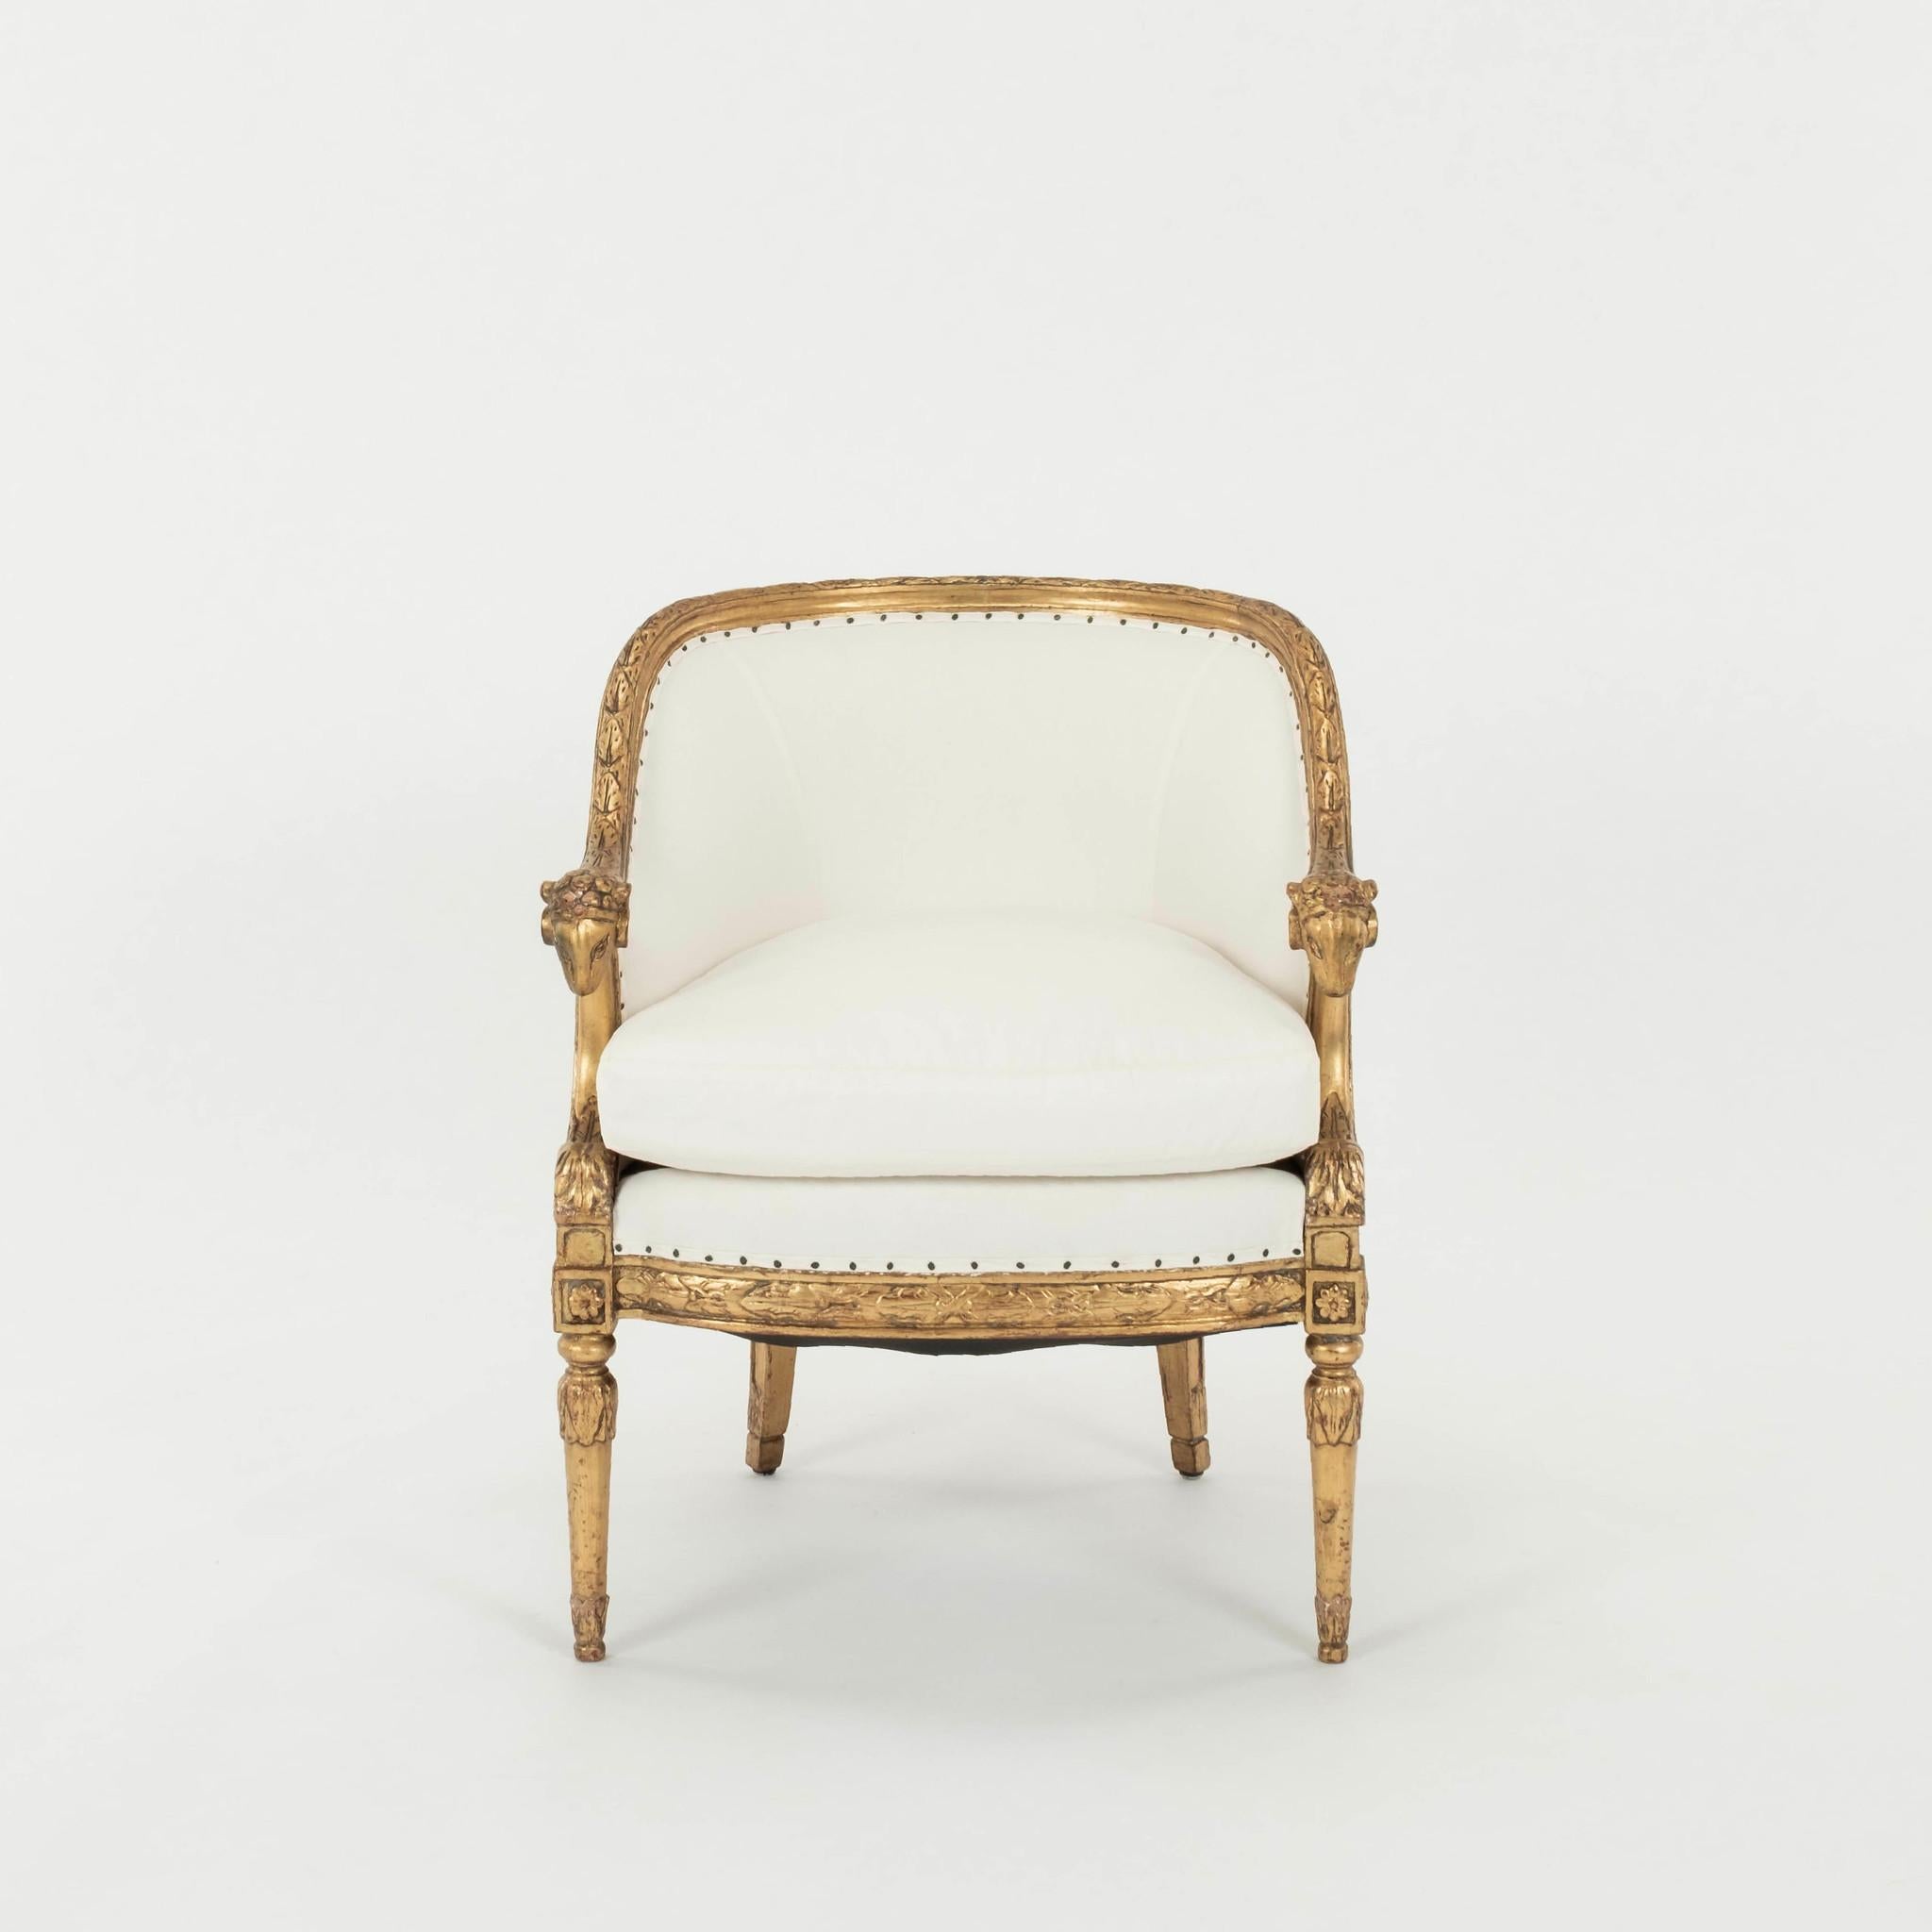 A pair of 20th Century classically styled gilt wood bergére chairs newly upholstered in a white cotton ticking fabric with feather down wrapped seat cushion.

These chairs also available C.O.M. with quick turnaround for additional $800.00.